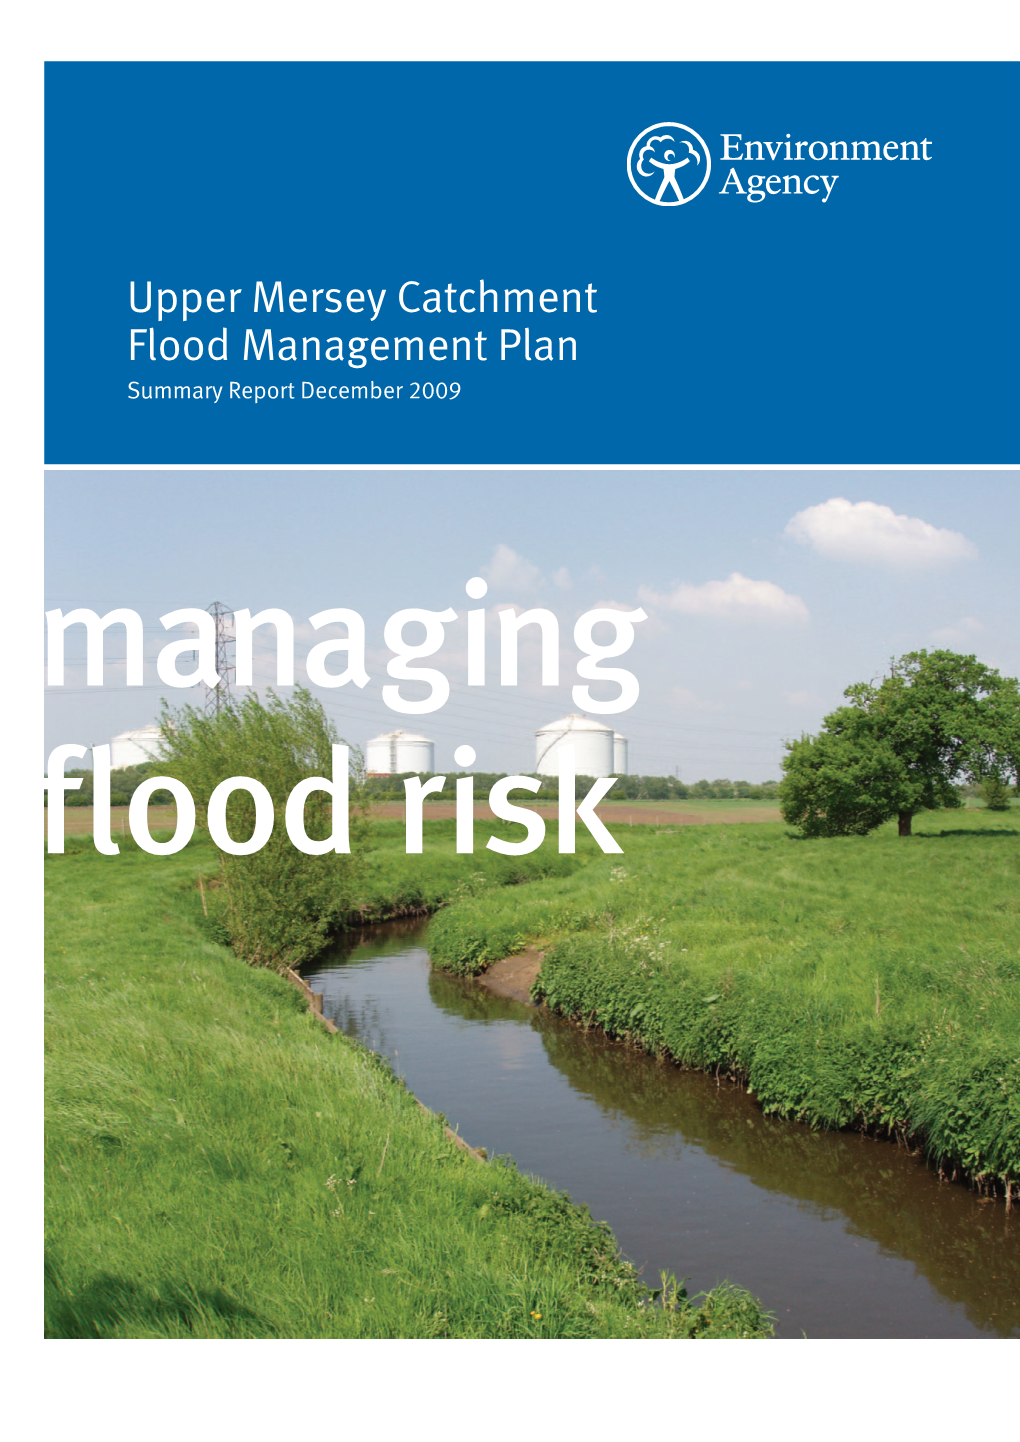 Upper Mersey Catchment Flood Management Plan Summary Report December 2009 Managing Flood Risk We Are the Environment Agency